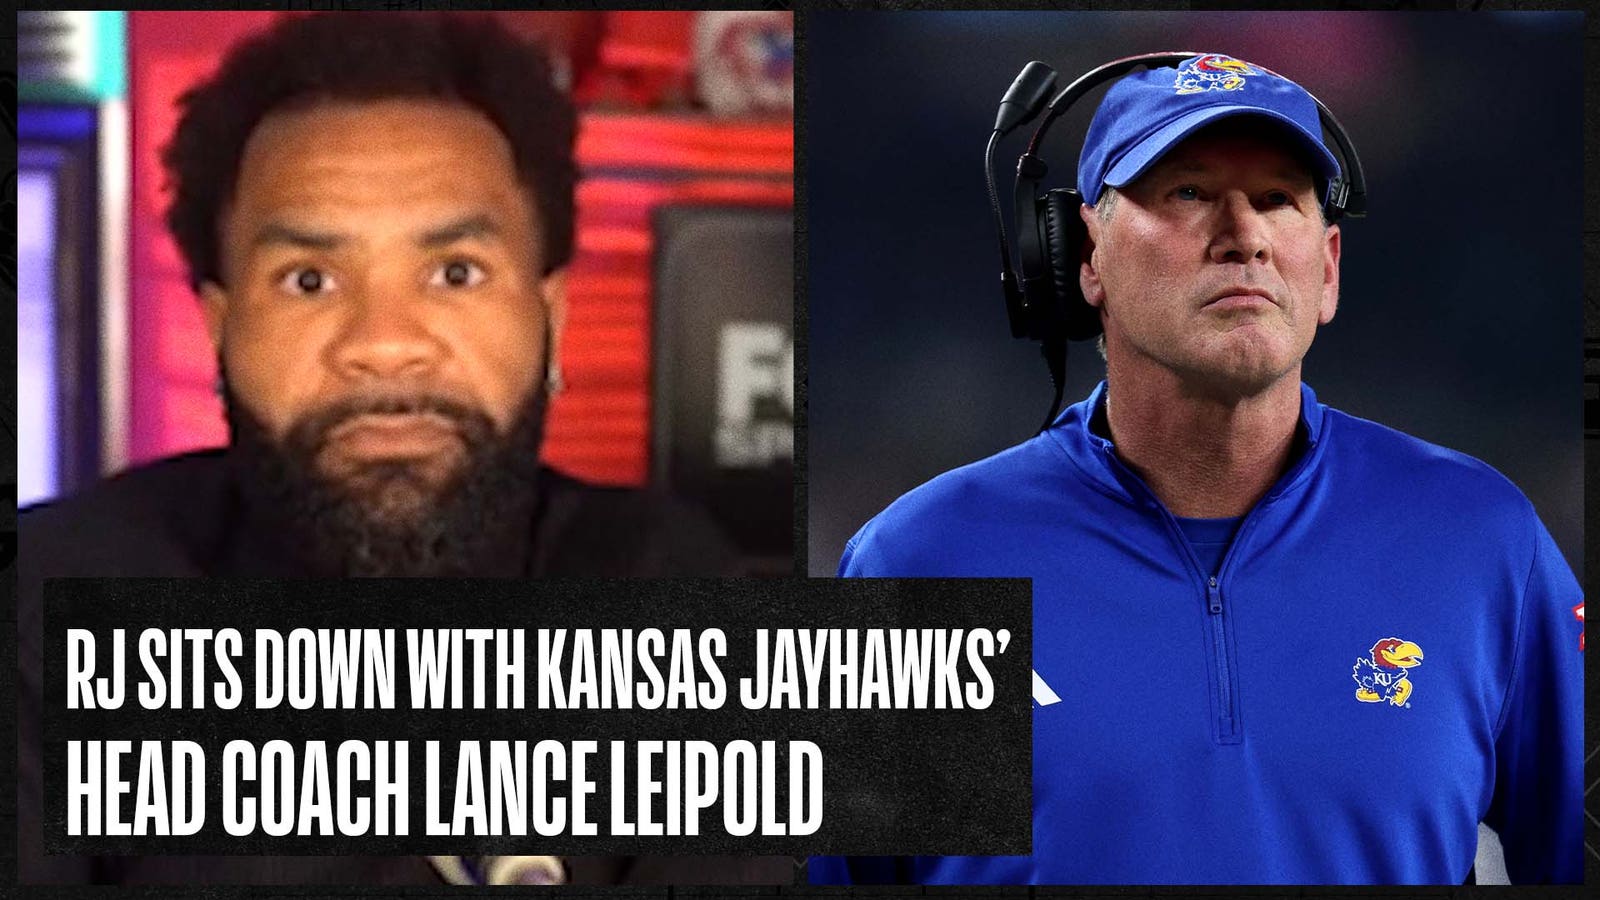 Kansas head coach Lance Leipold on his expectations for the upcoming season